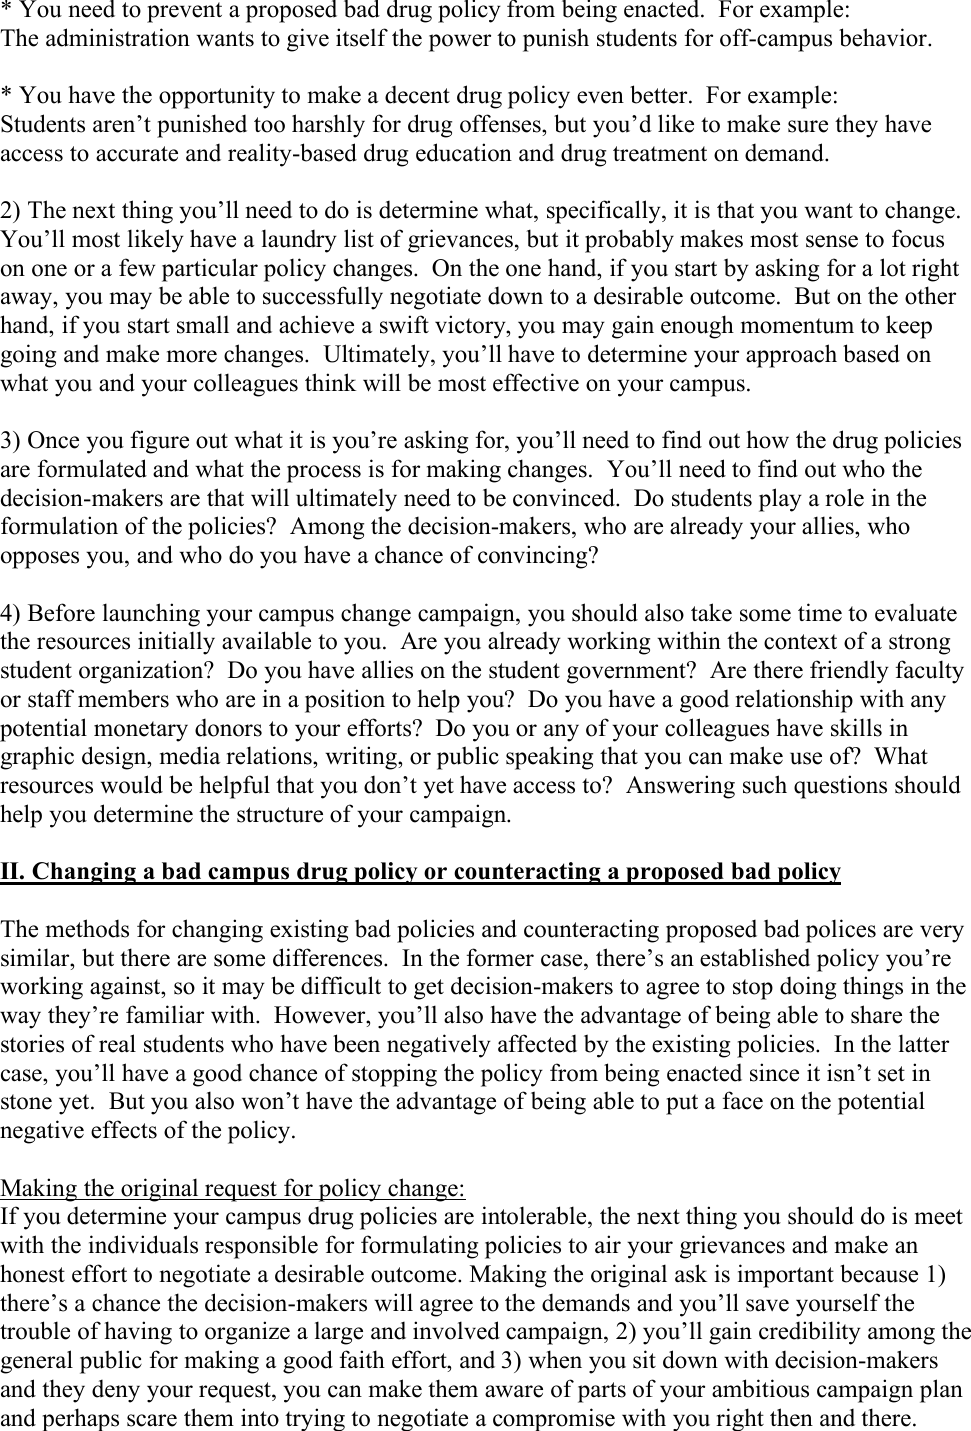 Page 2 of 12 - CCC_GrassrootsGuide Ccc-grassroots-guide